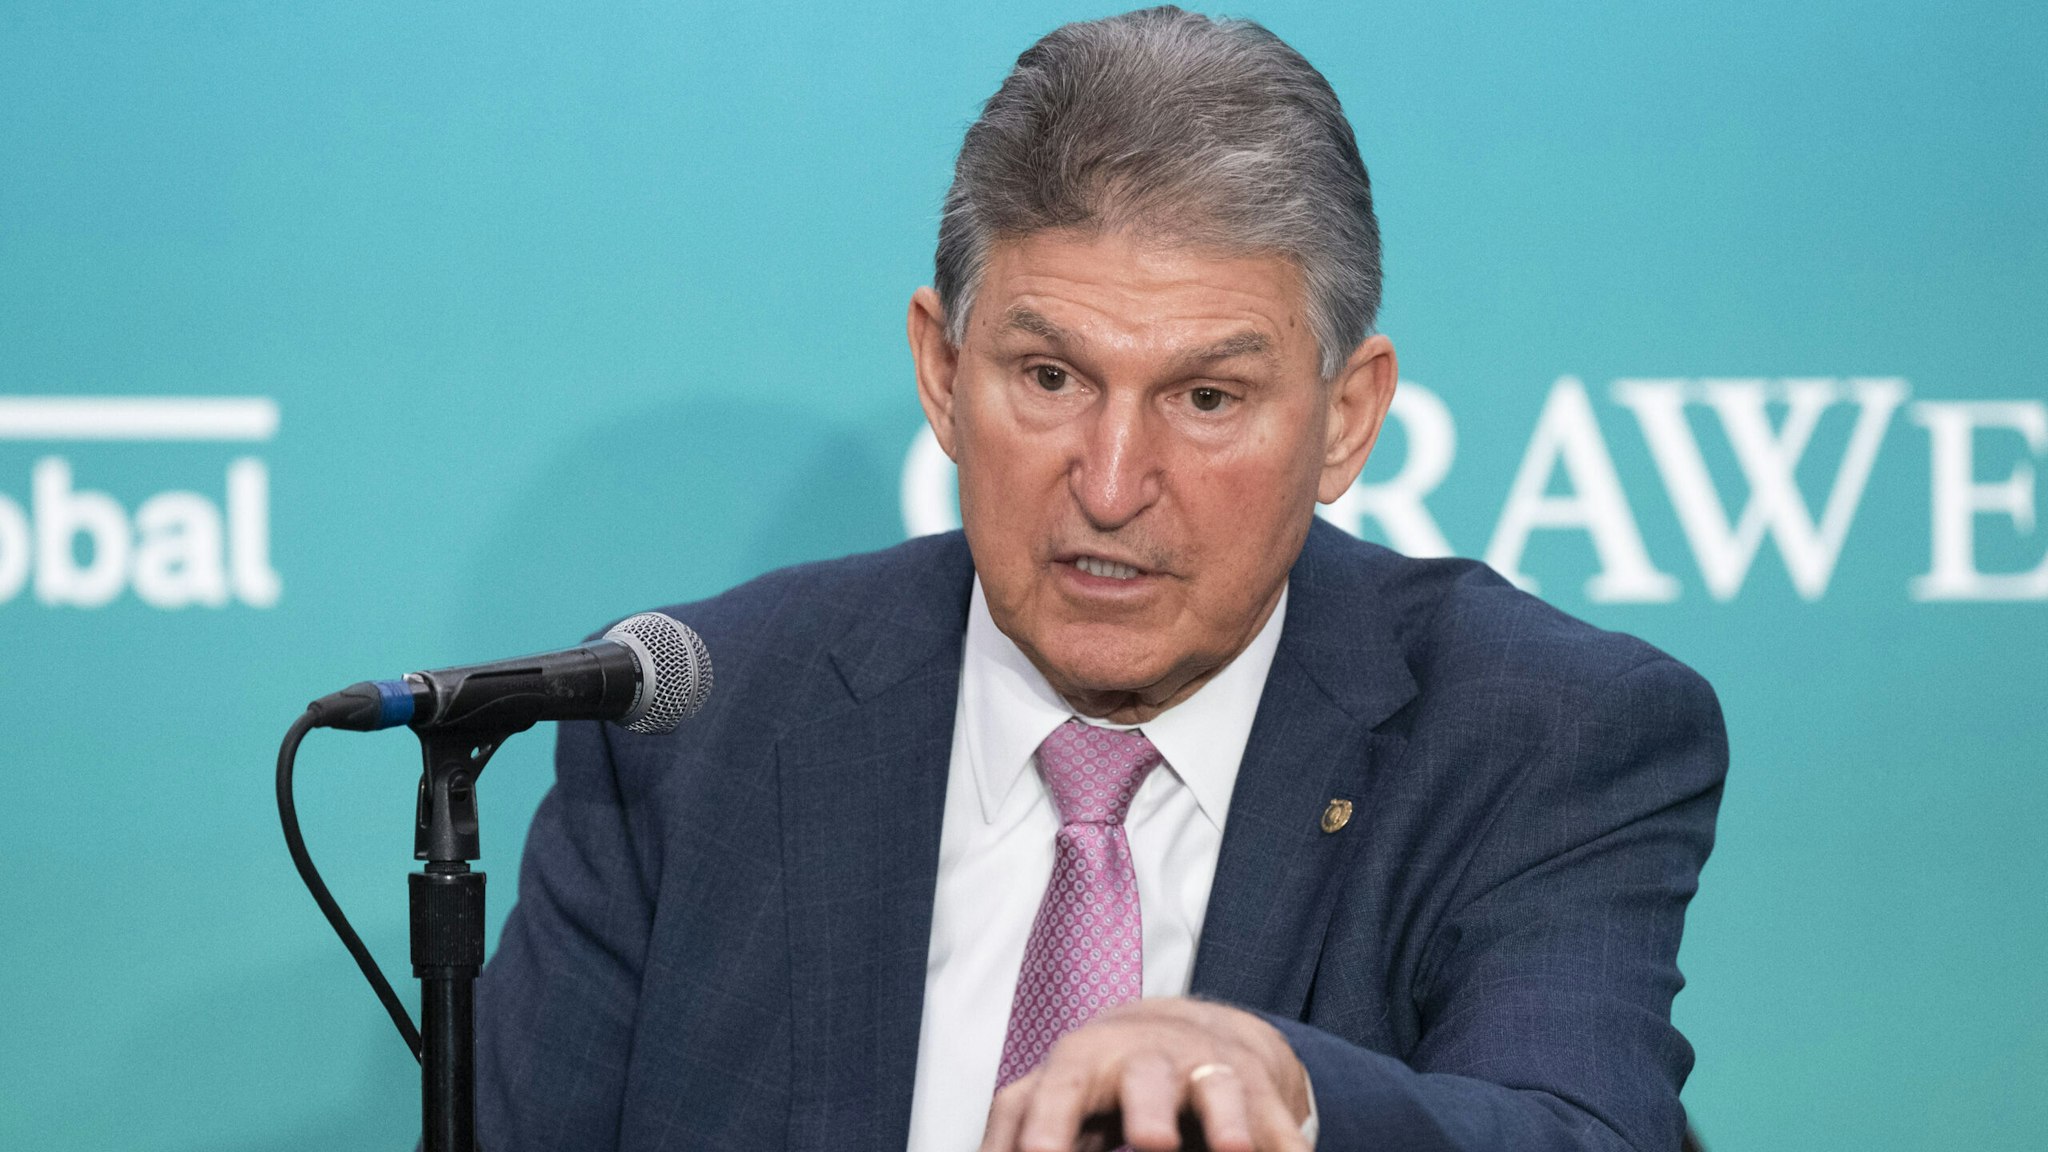 Senator Joe Manchin, a Democrat from West Virginia and chairman of the Senate Energy and Natural Resources Committee, speaks during a news conference at the 2022 CERAWeek by S&amp;P Global conference in Houston, Texas, U.S., on Friday, March 11, 2022. CERAWeek returned in-person to Houston celebrating its 40th anniversary with the theme "Pace of Change: Energy, Climate, and Innovation."